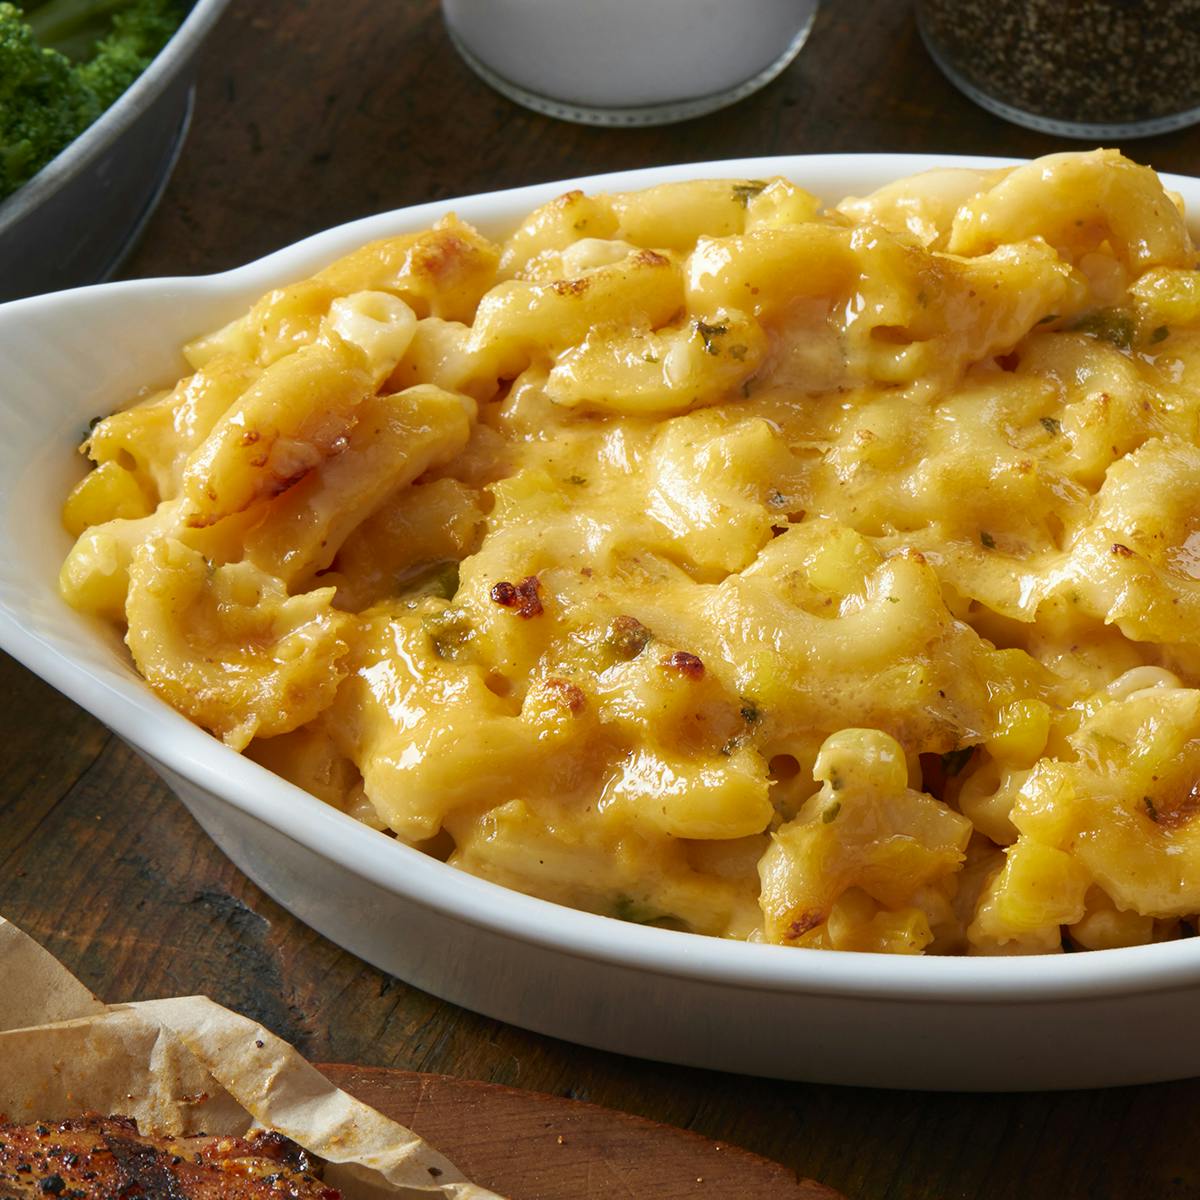 Dave's Cheesy Mac & Cheese from Famous Dave's - Eau Claire in Eau Claire, WI